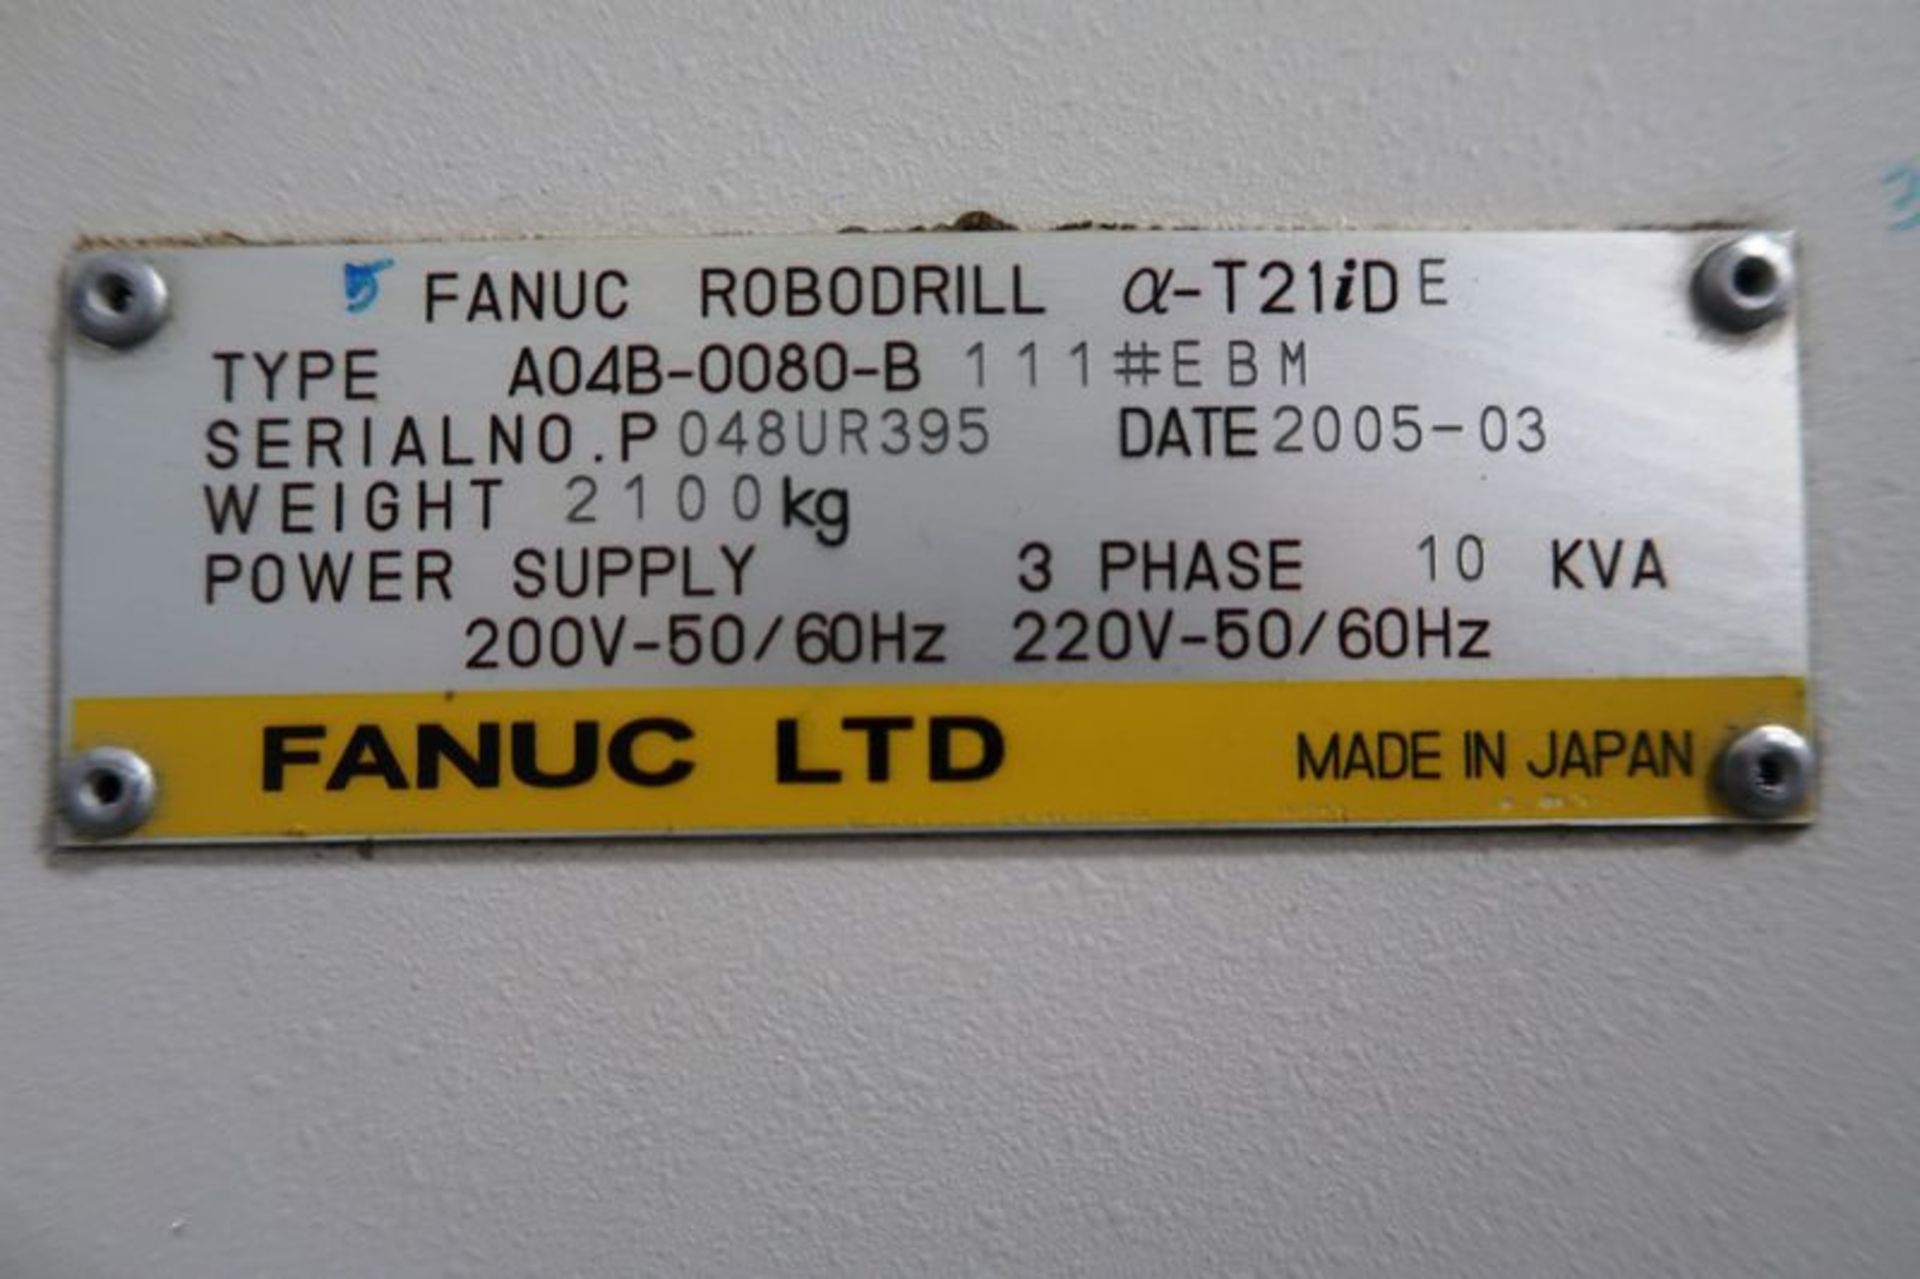 2005 Fanuc Robodrill Alpha T21iDE 3-Axis Vertical High Speed Drill Tap Center, S/N PO48UR395 - Image 9 of 11